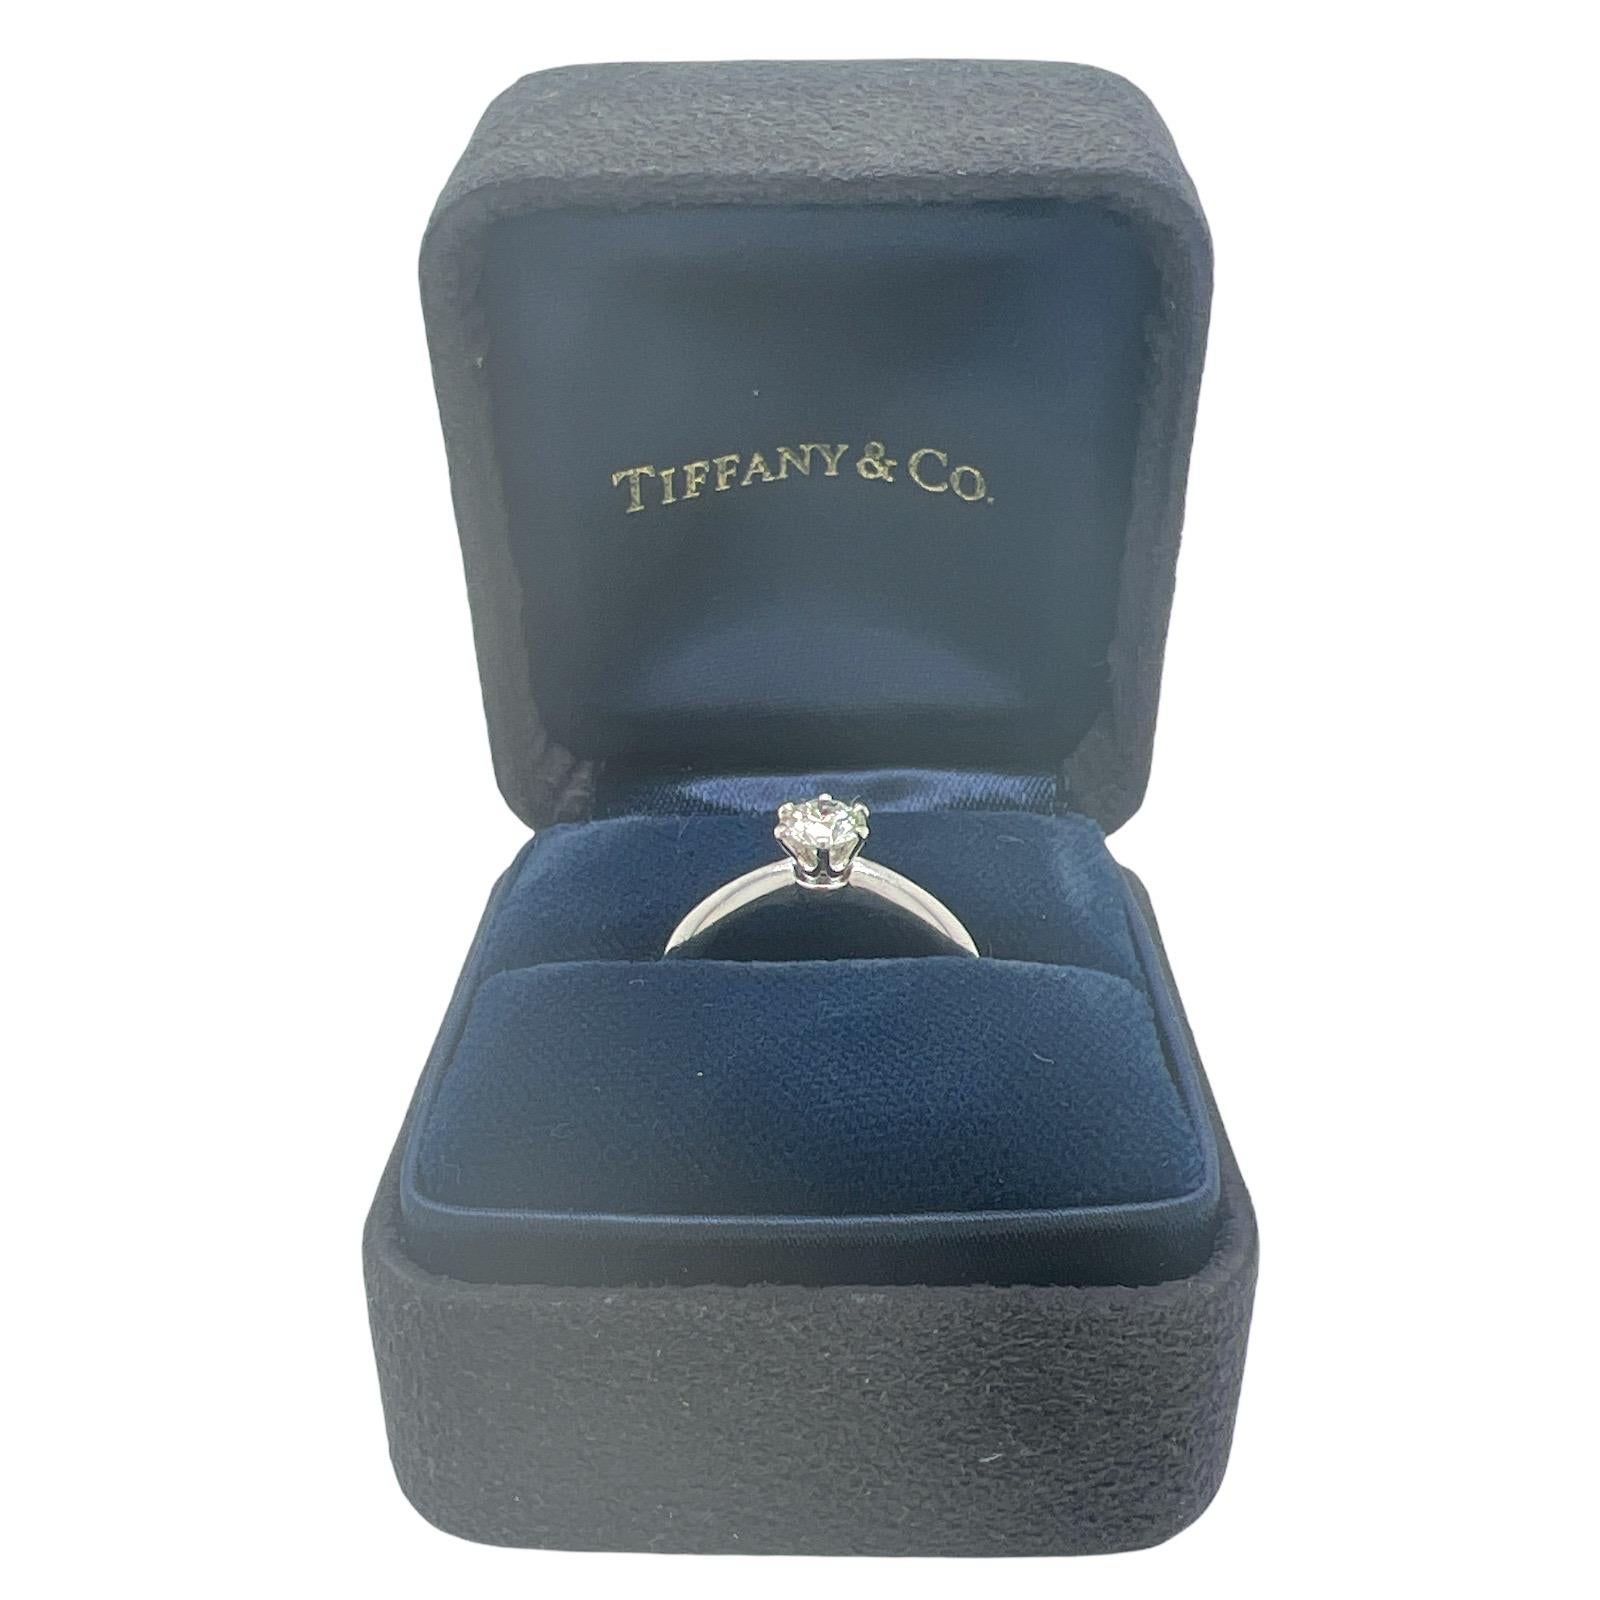 Tiffany & Co. Diamond Platinum Engagement Ring with original Box & Papers. The ring features a .37 carat round brilliant cut diamond graded I color and VS1 clarity. The platinum 6 prong mounting is currently size 5.5 (can be sized). The ring is